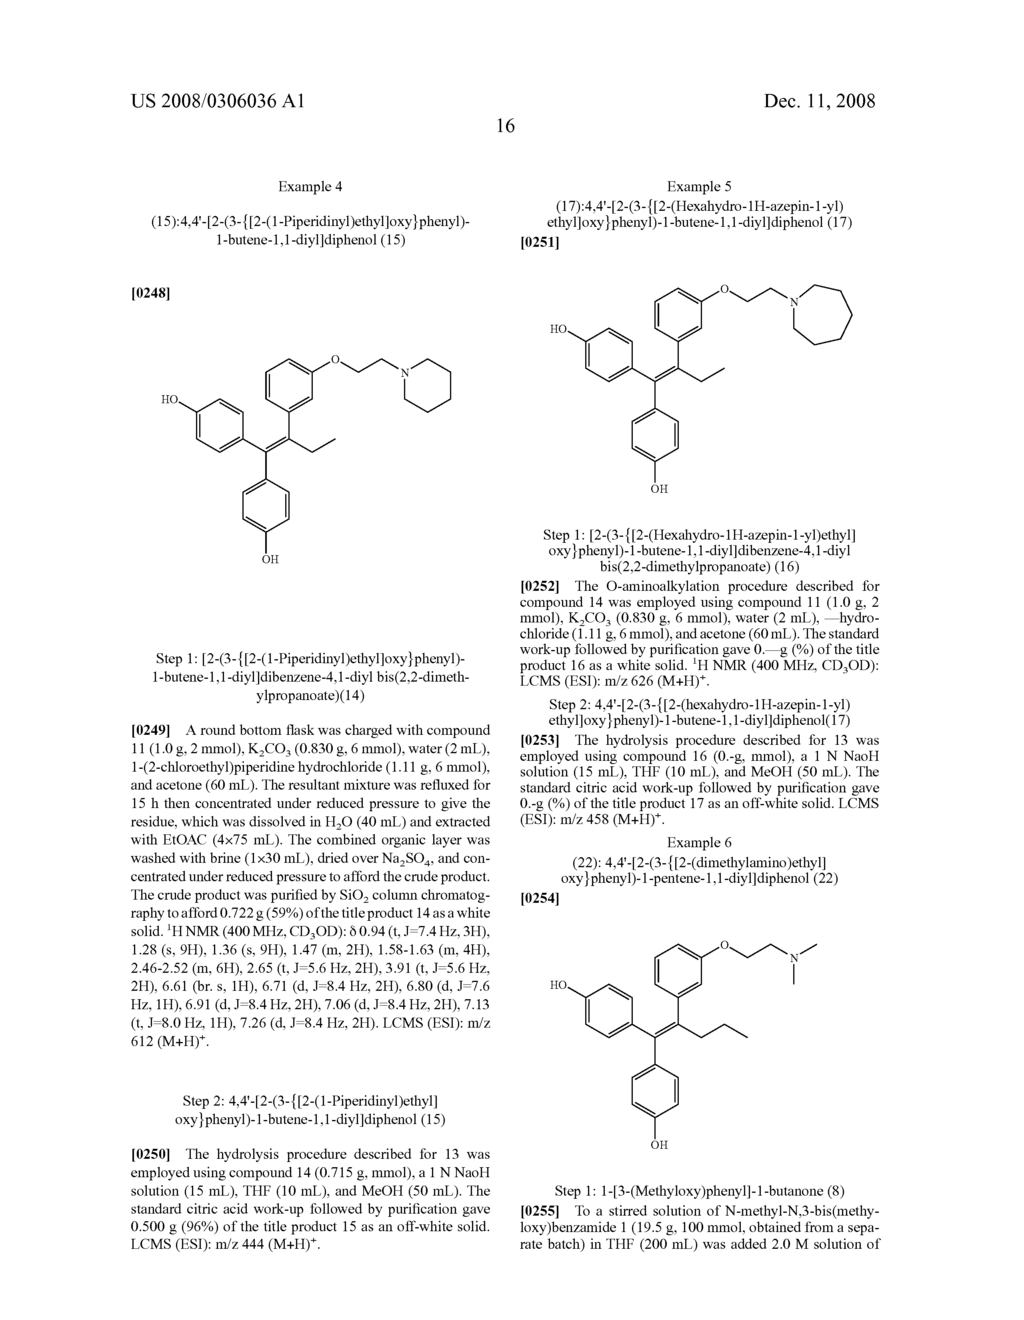 Triphenylethylene Compounds Useful as Selective Estrogen Modulators - diagram, schematic, and image 17